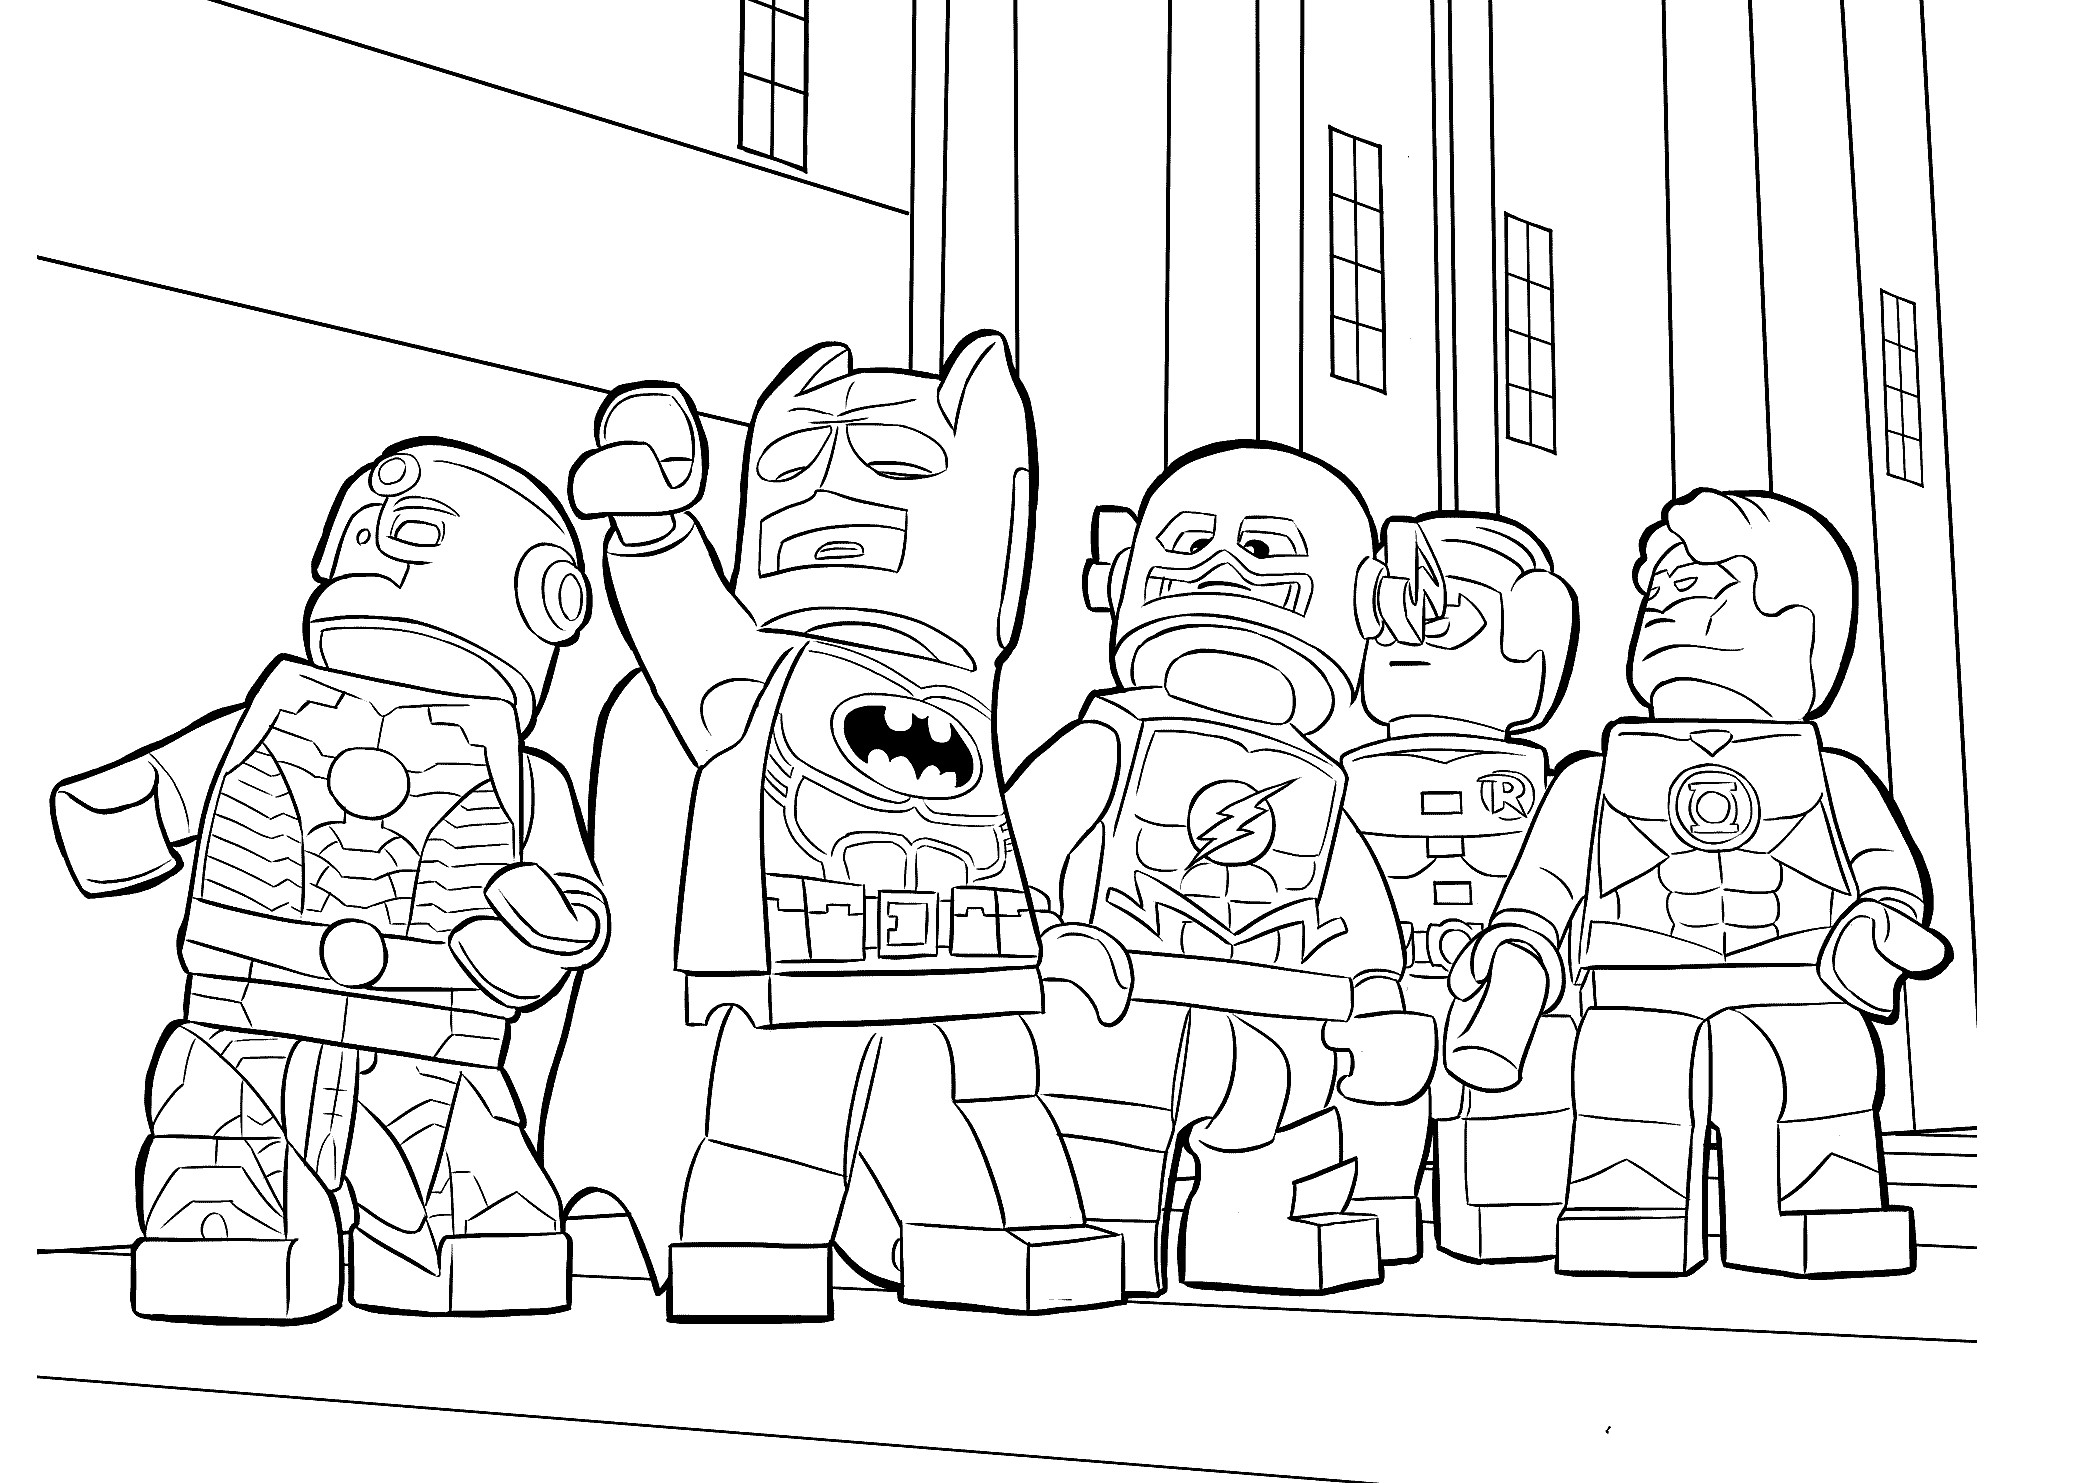 Coloring Pages For Boys To Print
 Lego heroes coloring page for boys printable free Lego